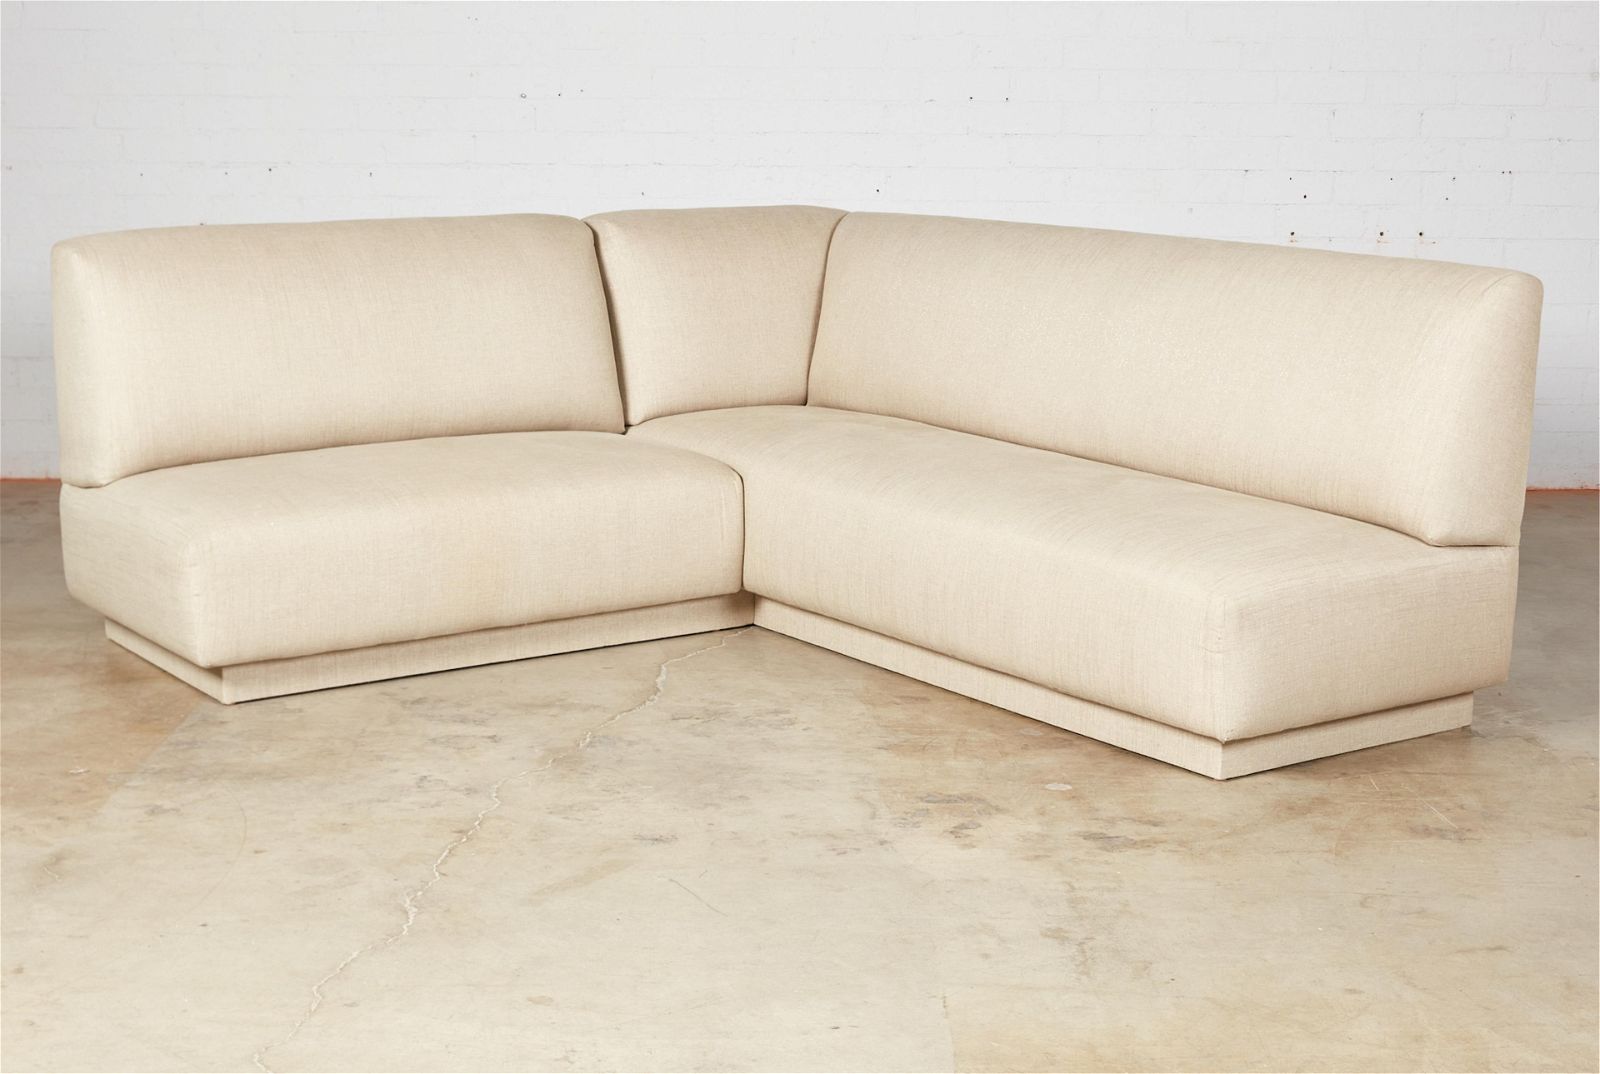 A CONTEMPORARY FULLY UPHOLSTERED